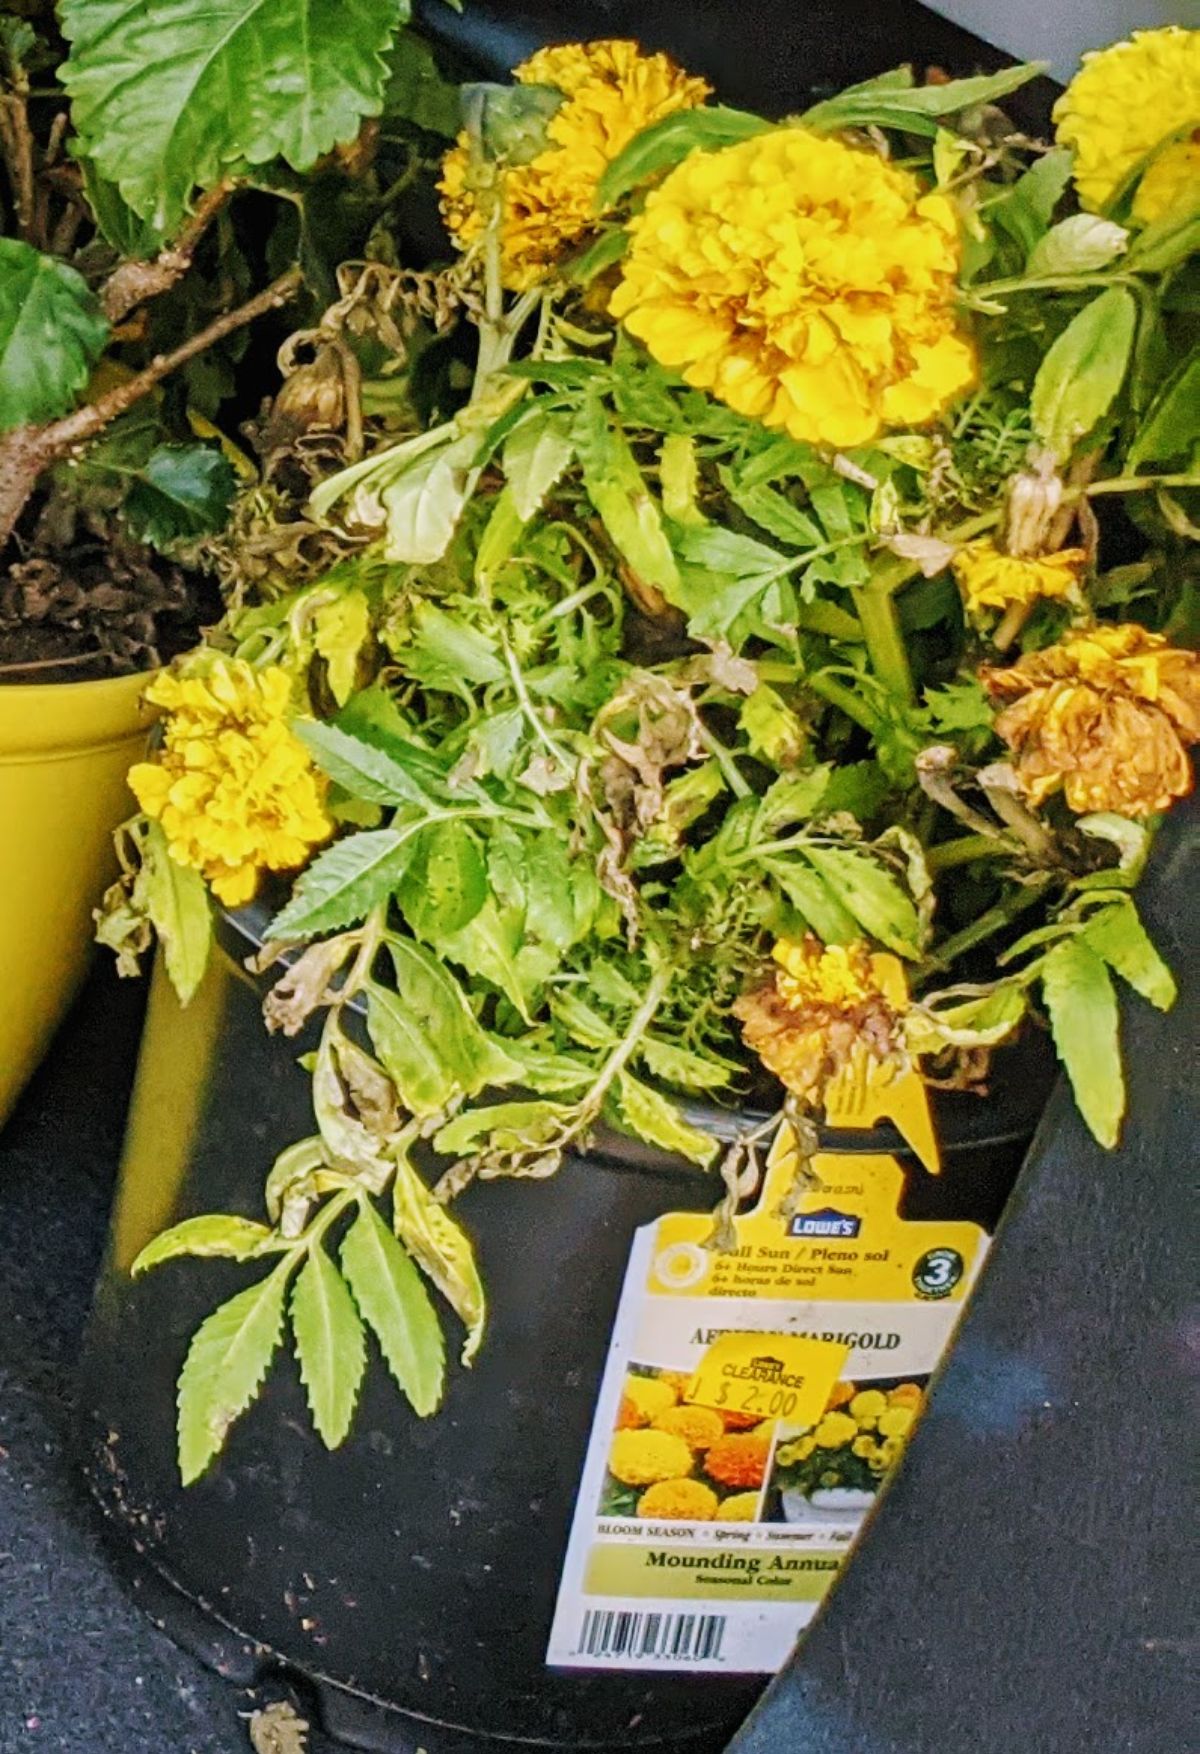 Yellow African marigold plant for sale on clearance for $2